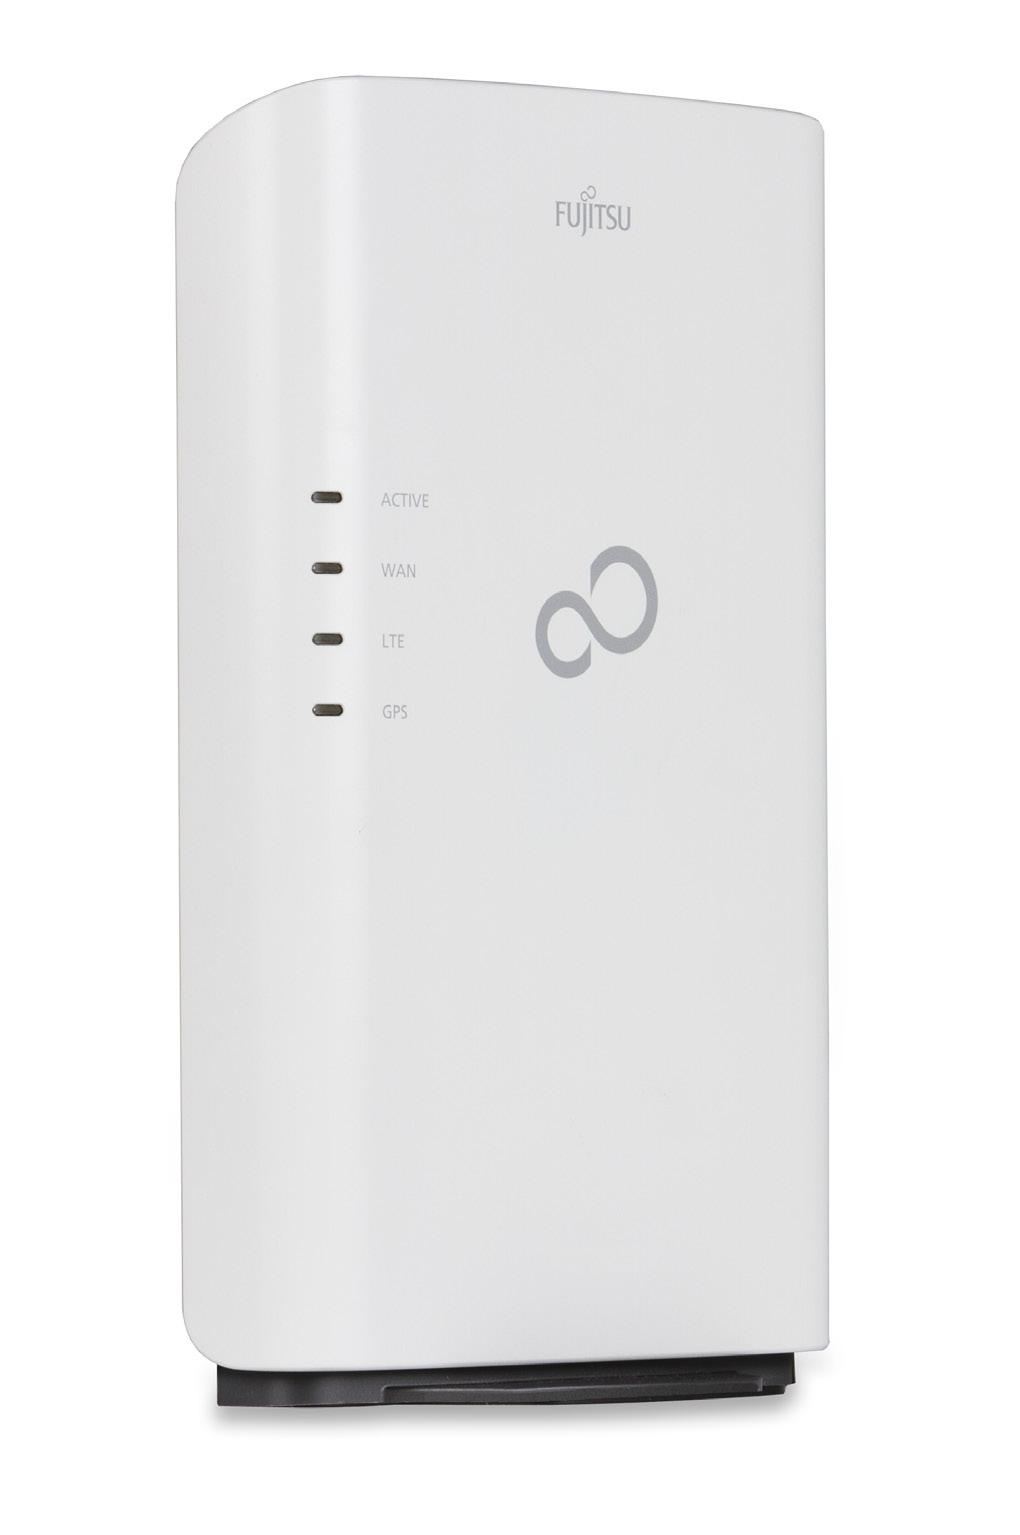 shaping tomorrow with you LS100 Series Residential Femtocell The LS100 series residential femtocell delivers fieldproven,